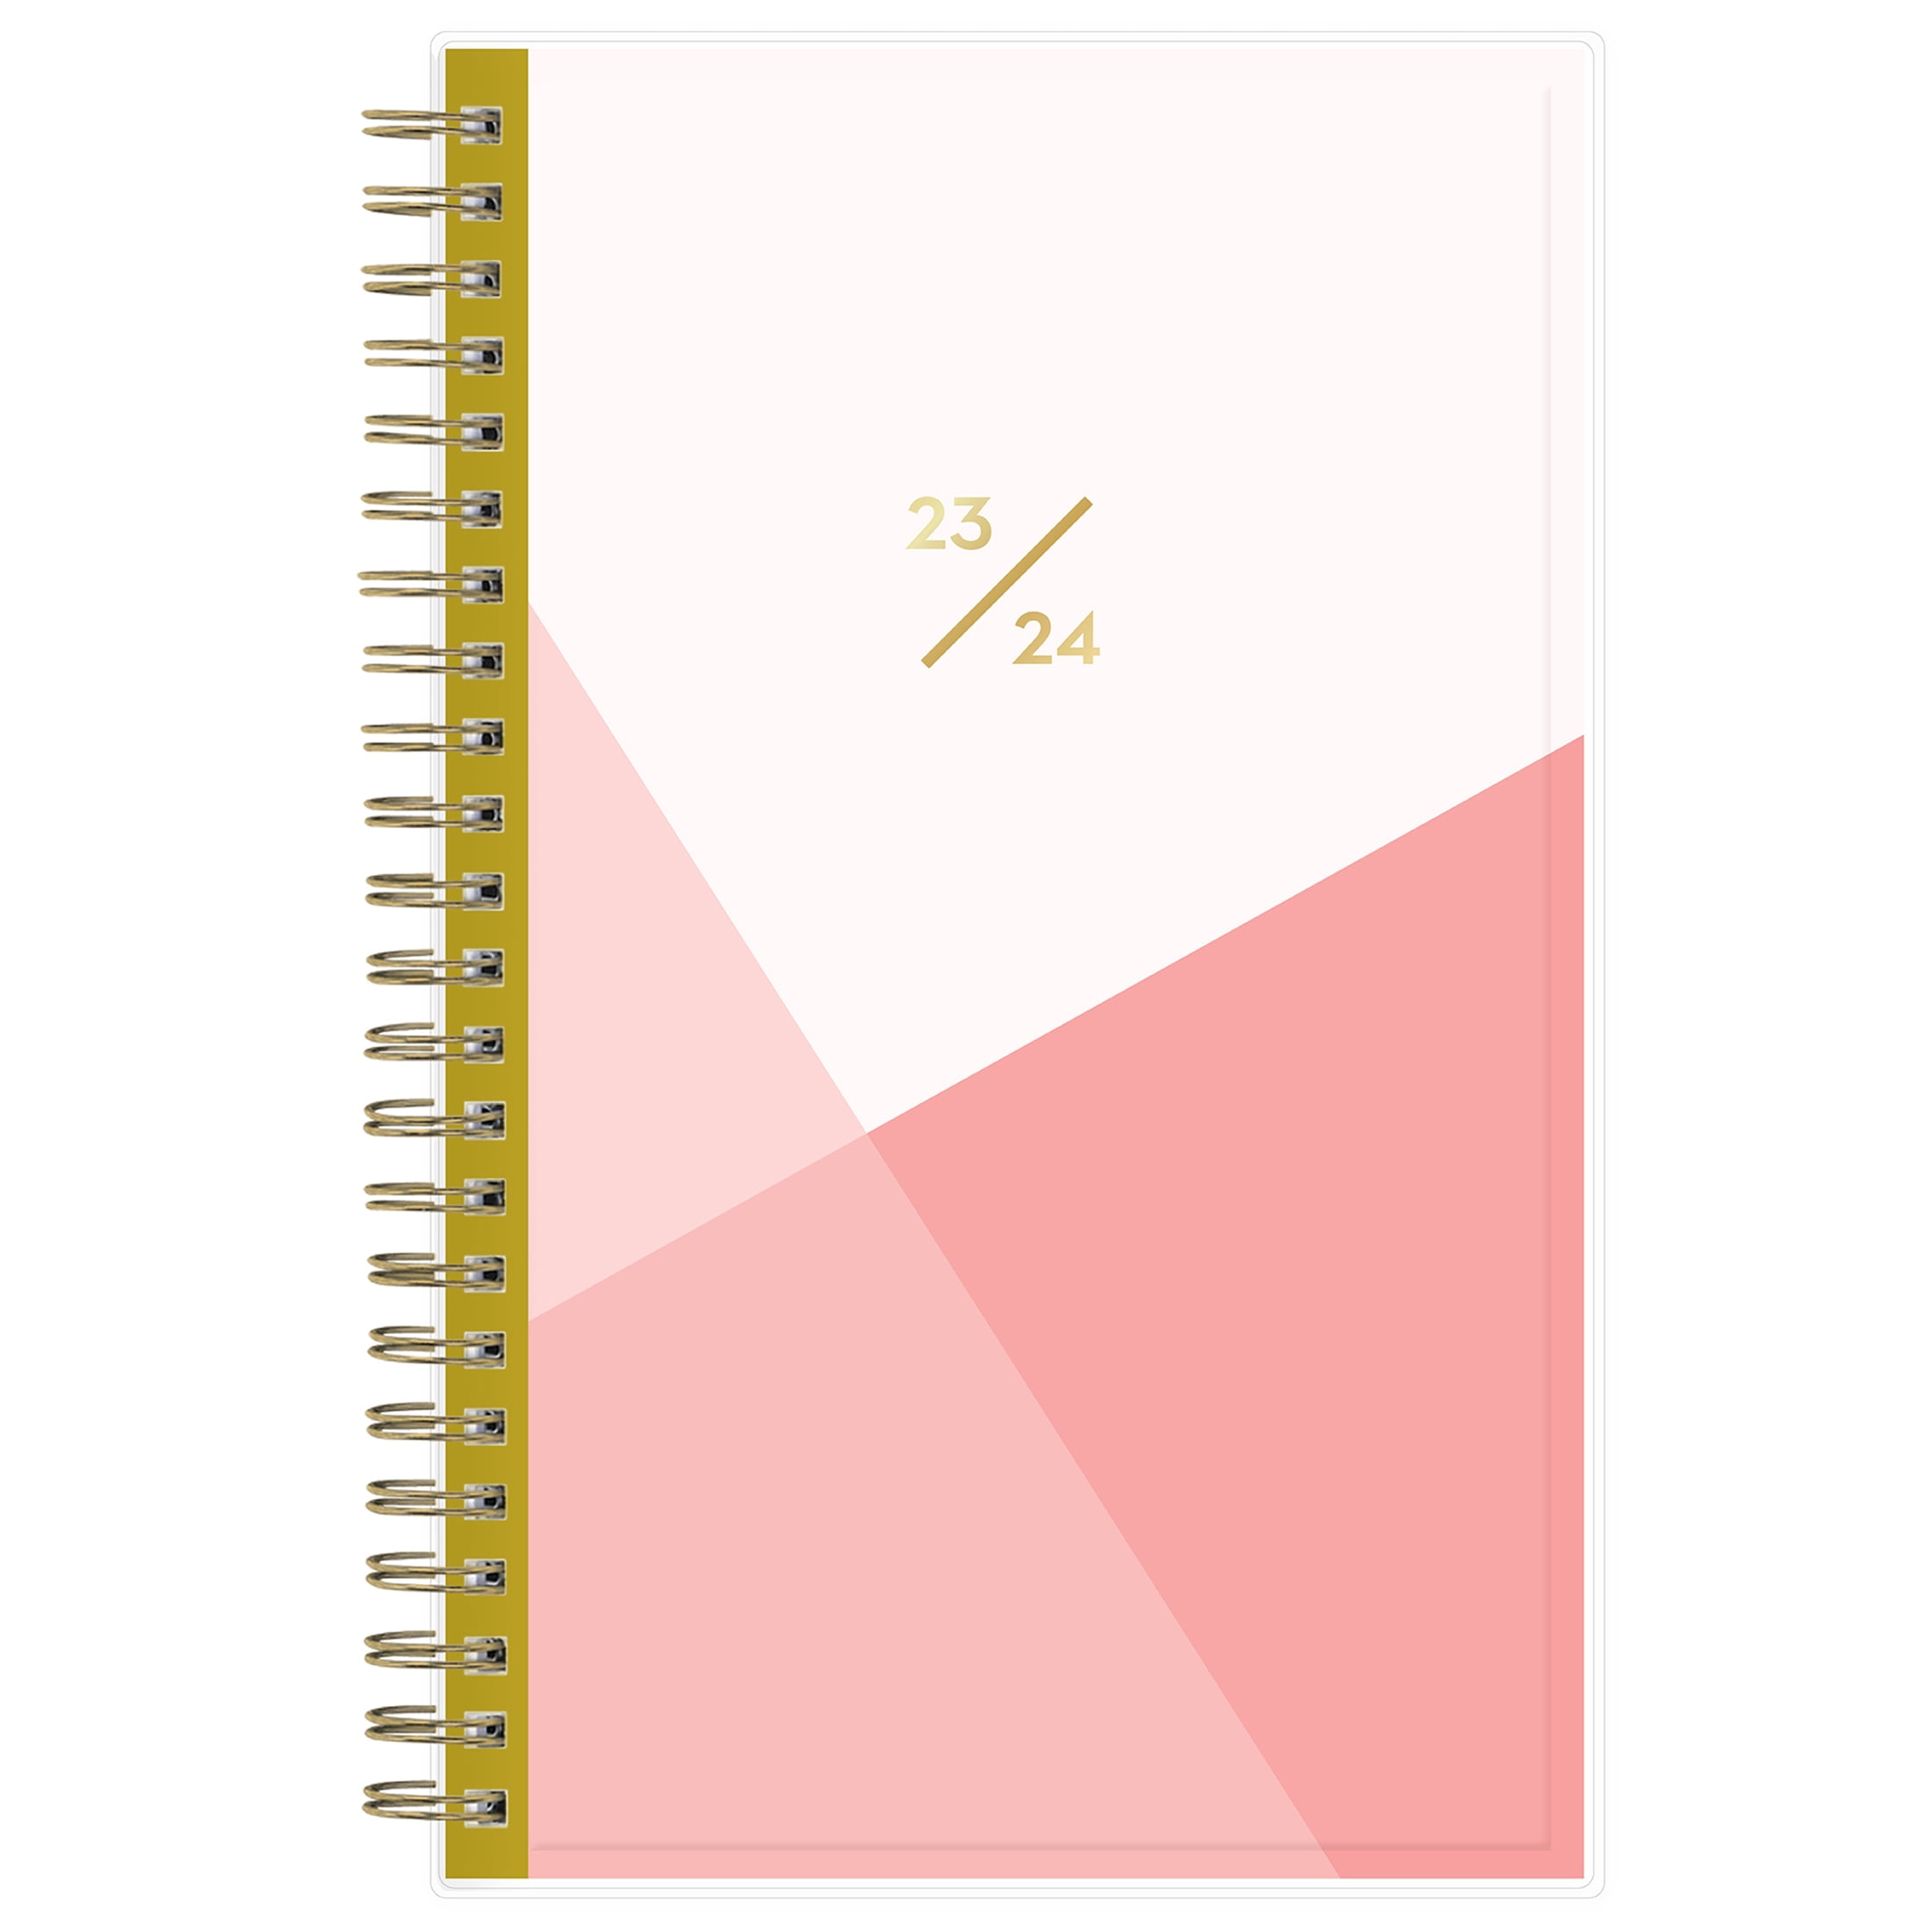 2023 - 2024 Hello Kitty 5x8 40K Weekly Spiral Planner Agenda Schedule Book  Pink Hard Kraft Cover Inspired by You.